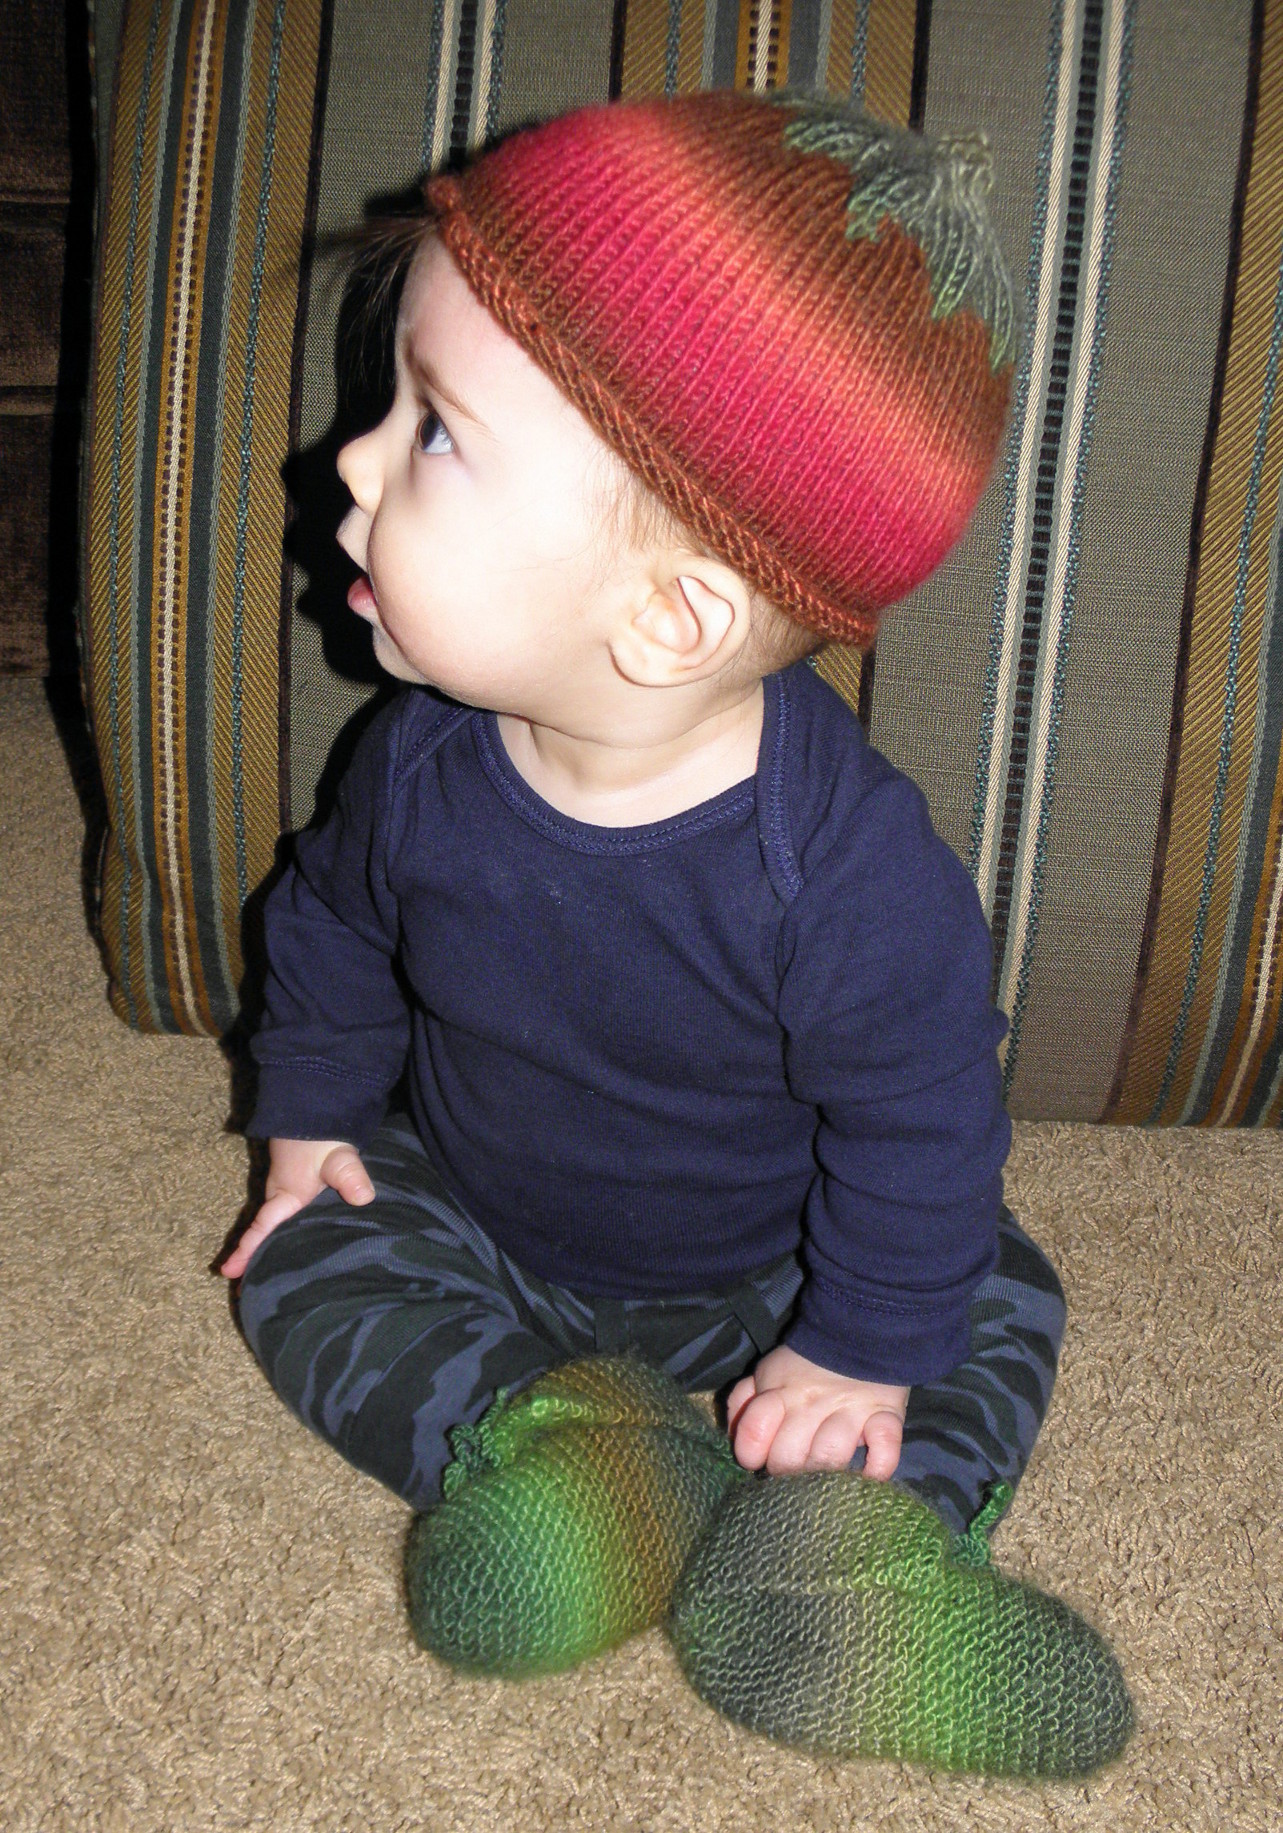 Baby with handknit hat